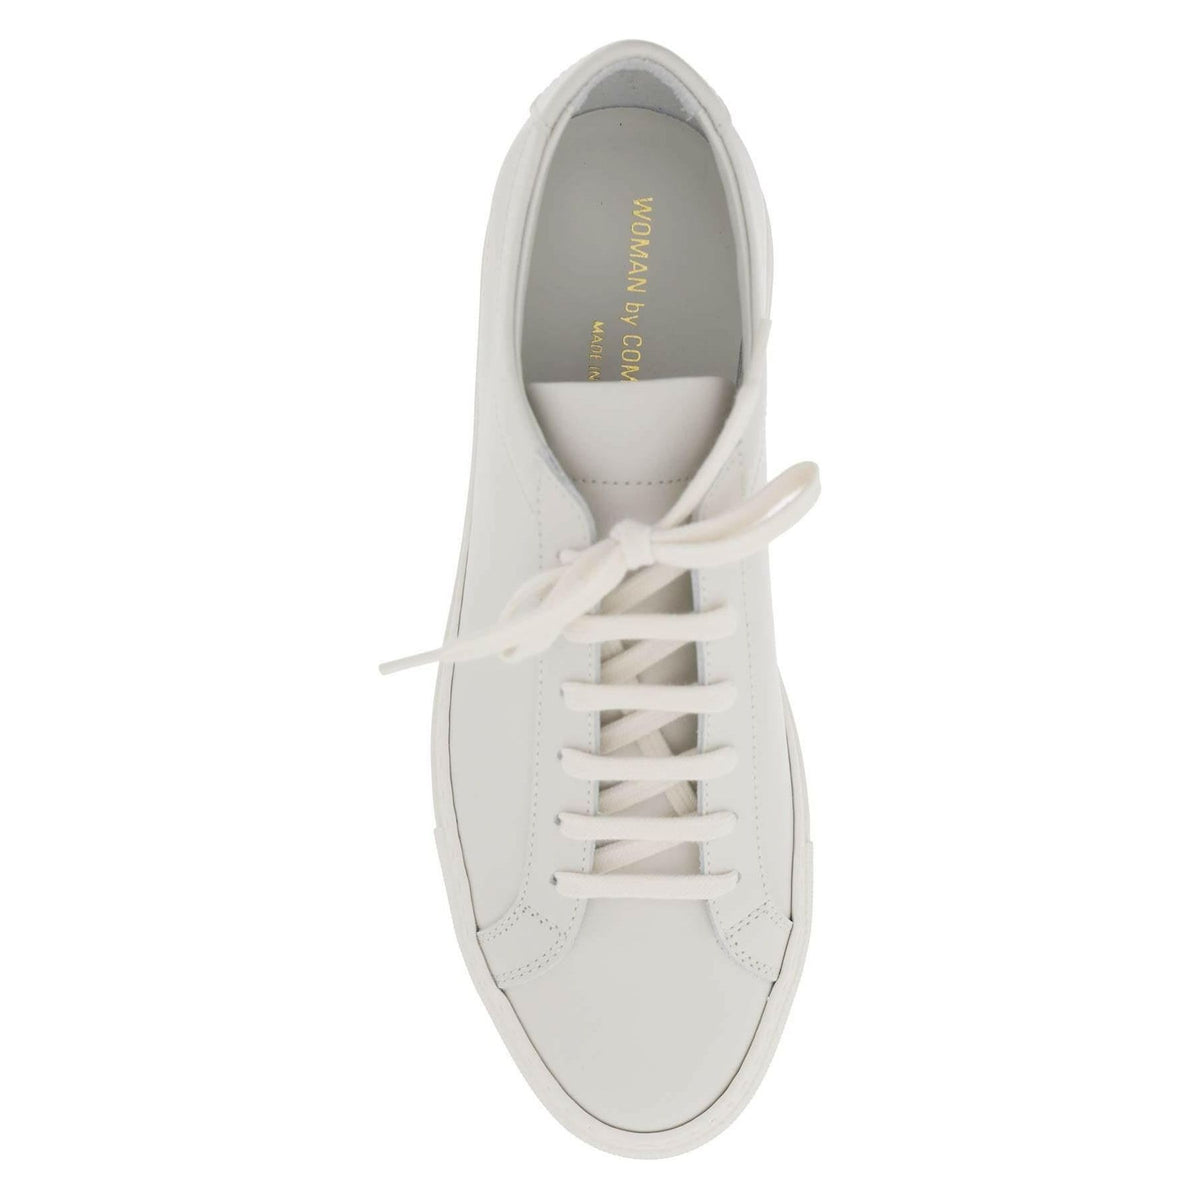 Warm White Original Achilles Low-Top Leather Sneakers COMMON PROJECTS JOHN JULIA.